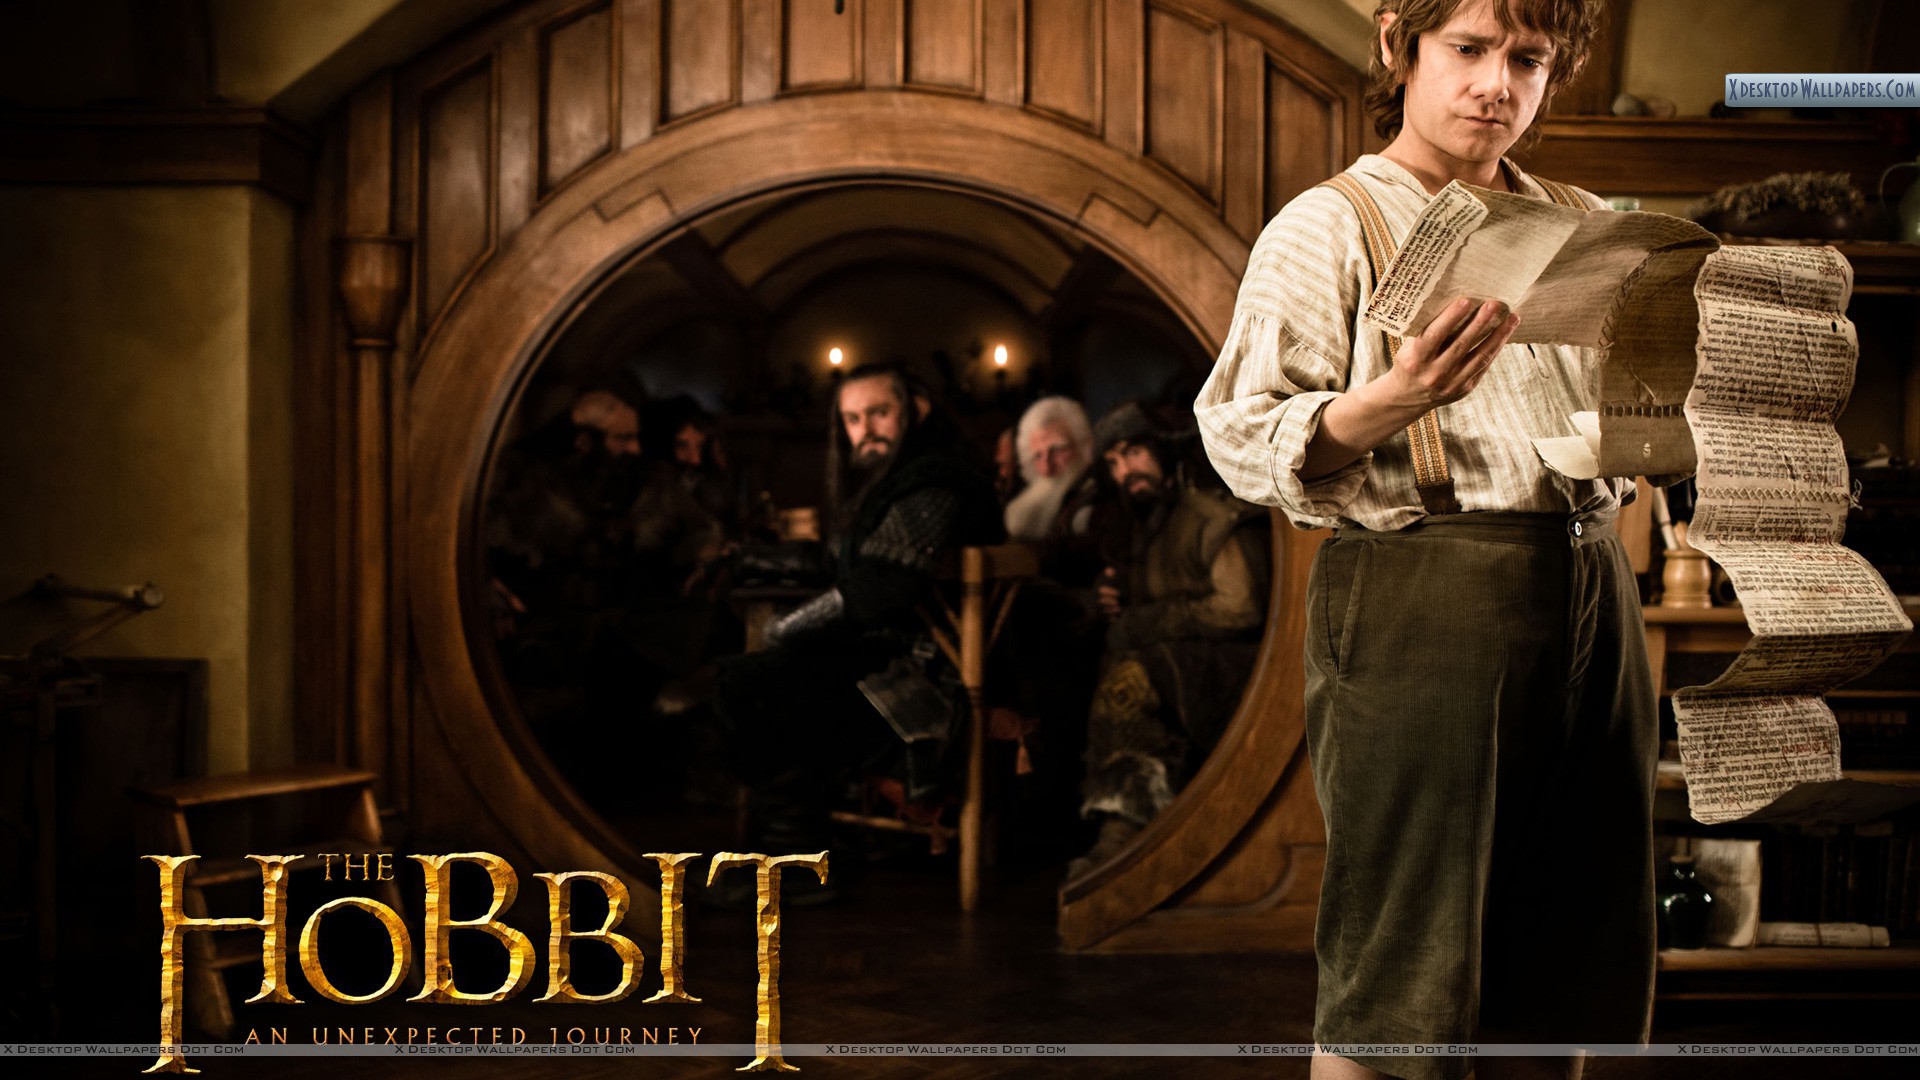 The Hobbit An Unexpected Journey Wallpaper Photos Image In HD